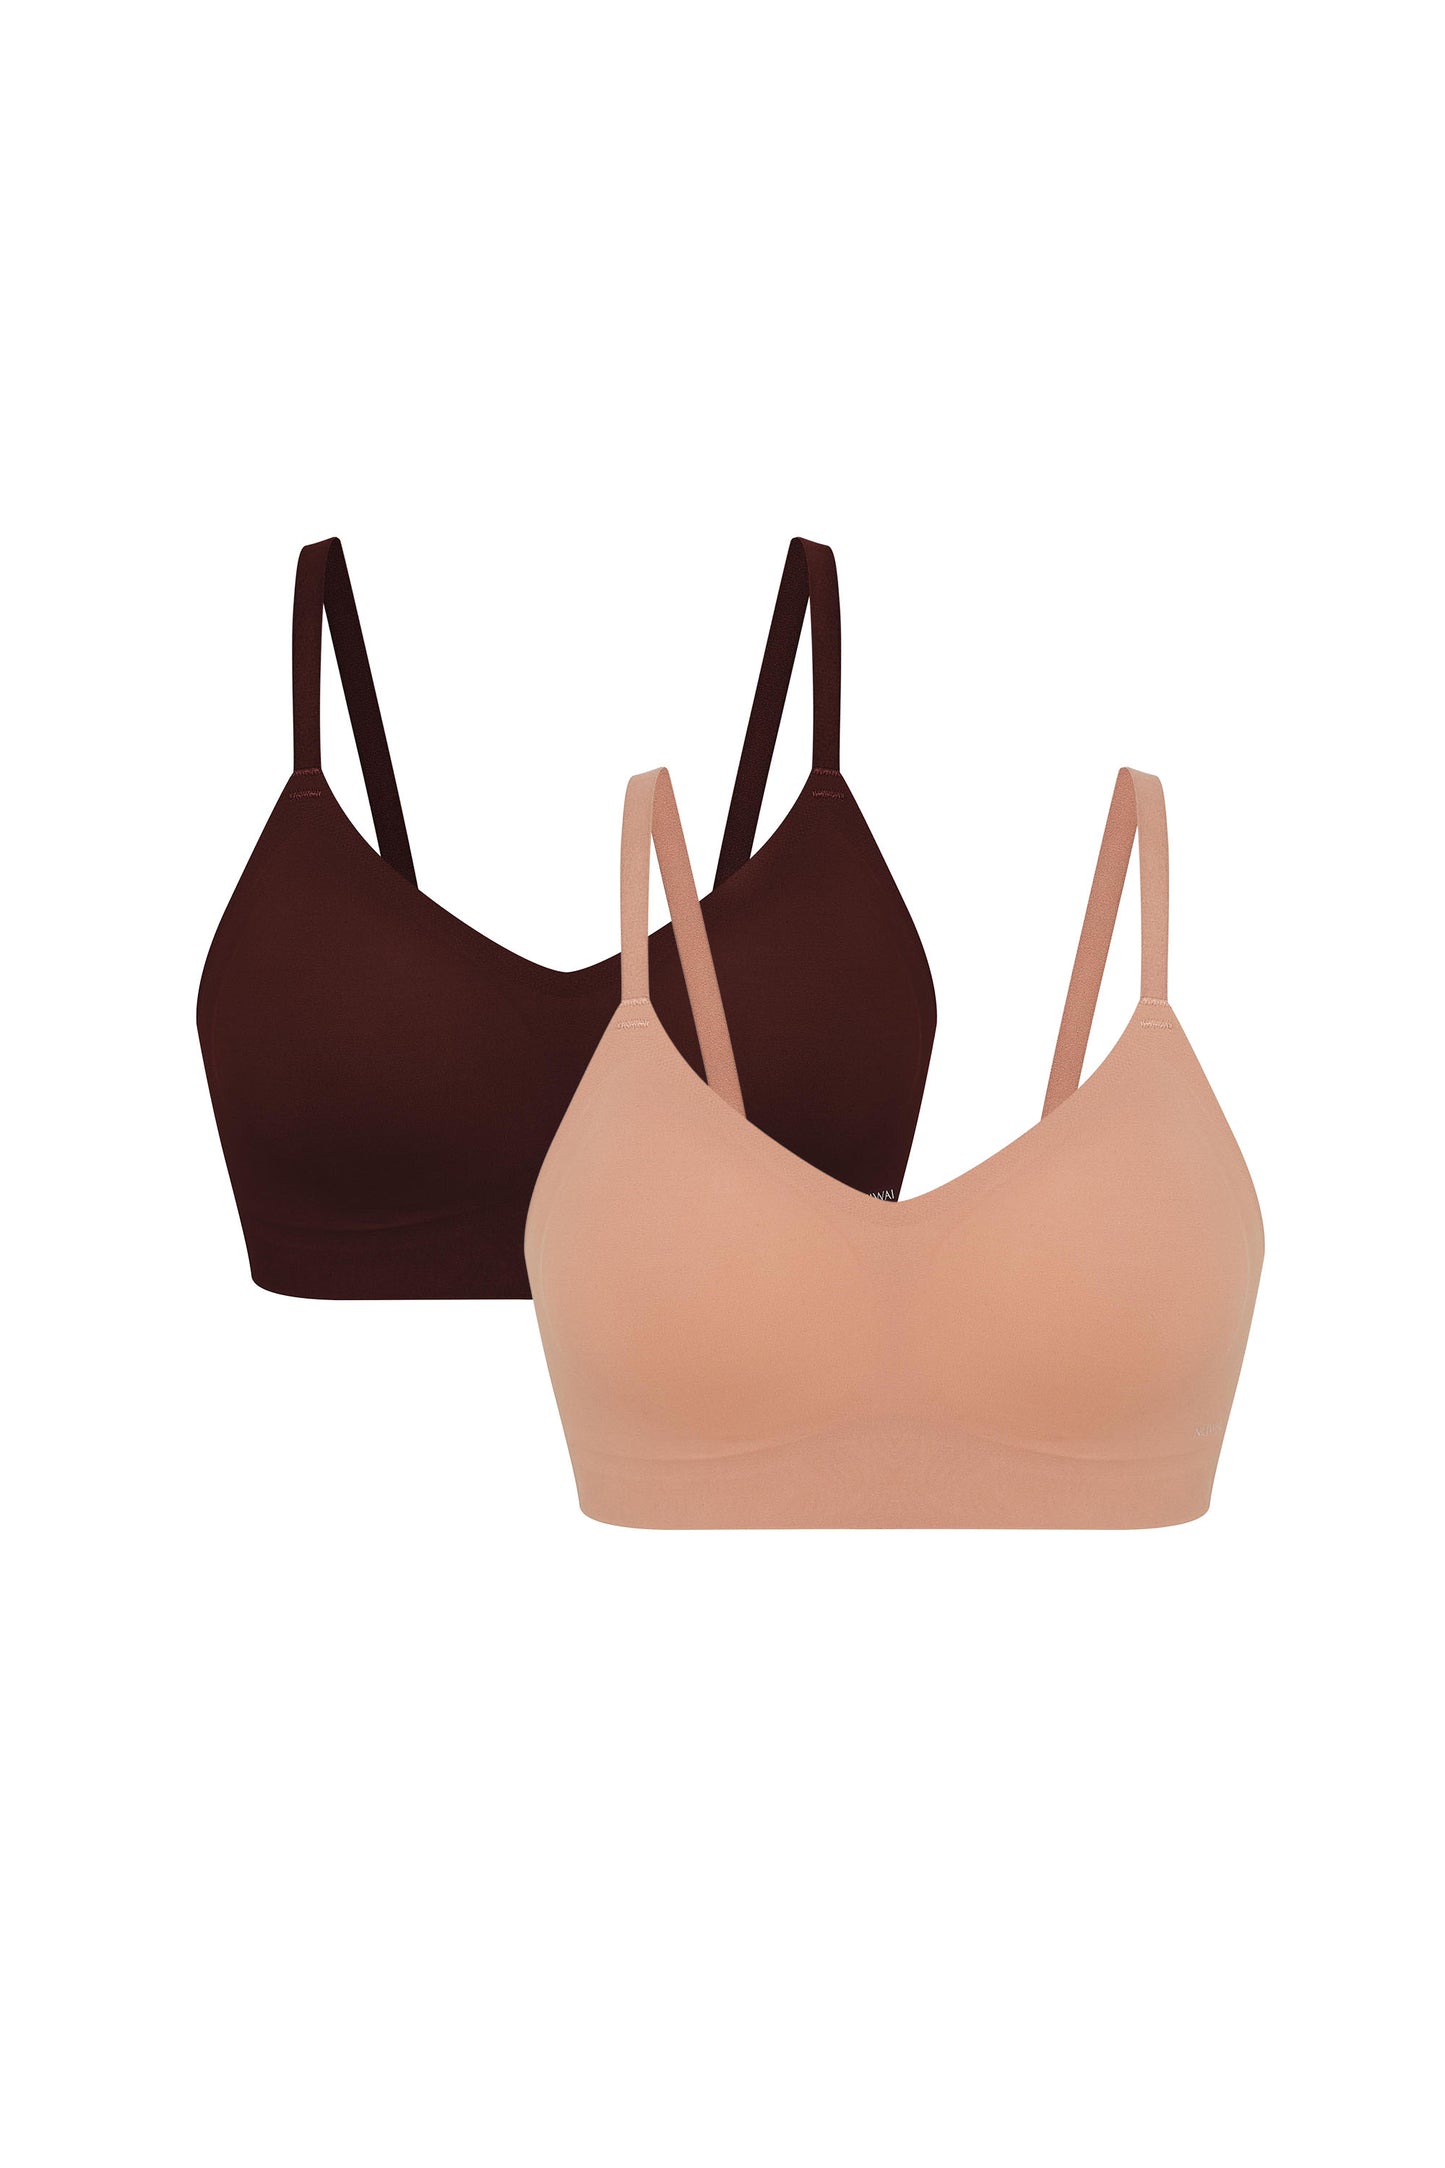 two bras, one in brown and one in tan